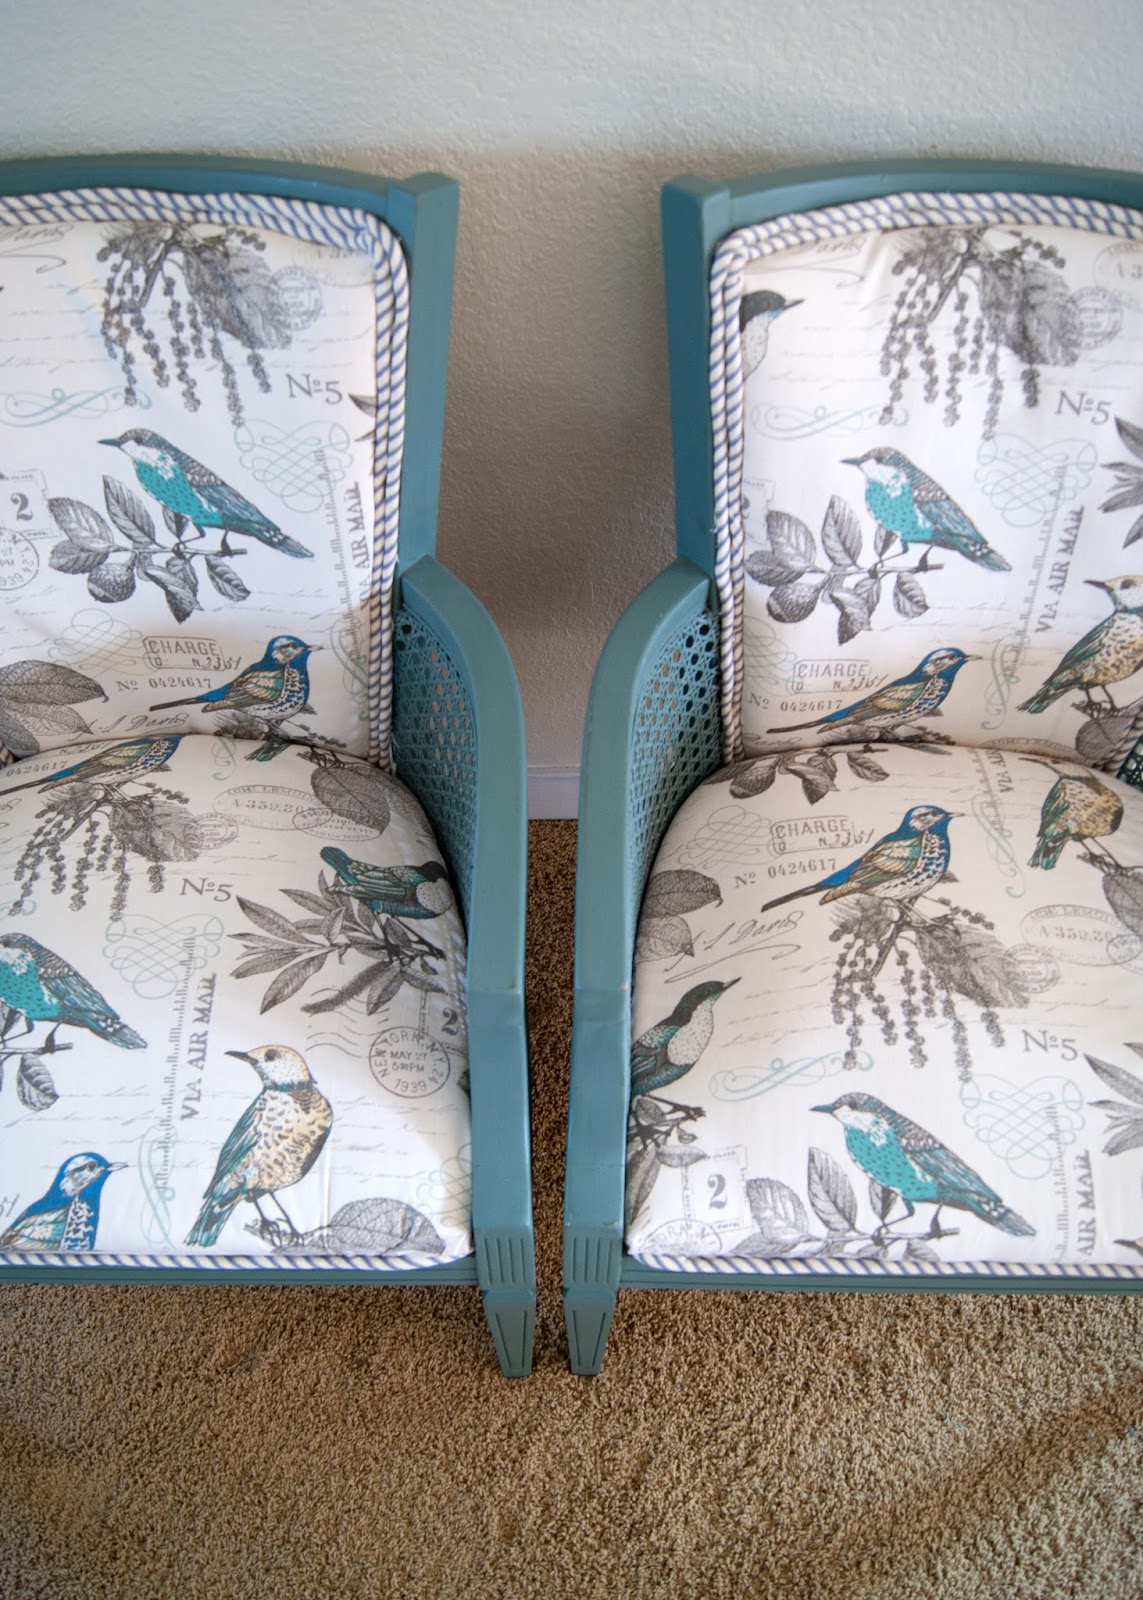 Chair Upholstering 101 - the unprofessional guide to giving a chair a makeover - caned chairs, mattress ticking, bird fabric